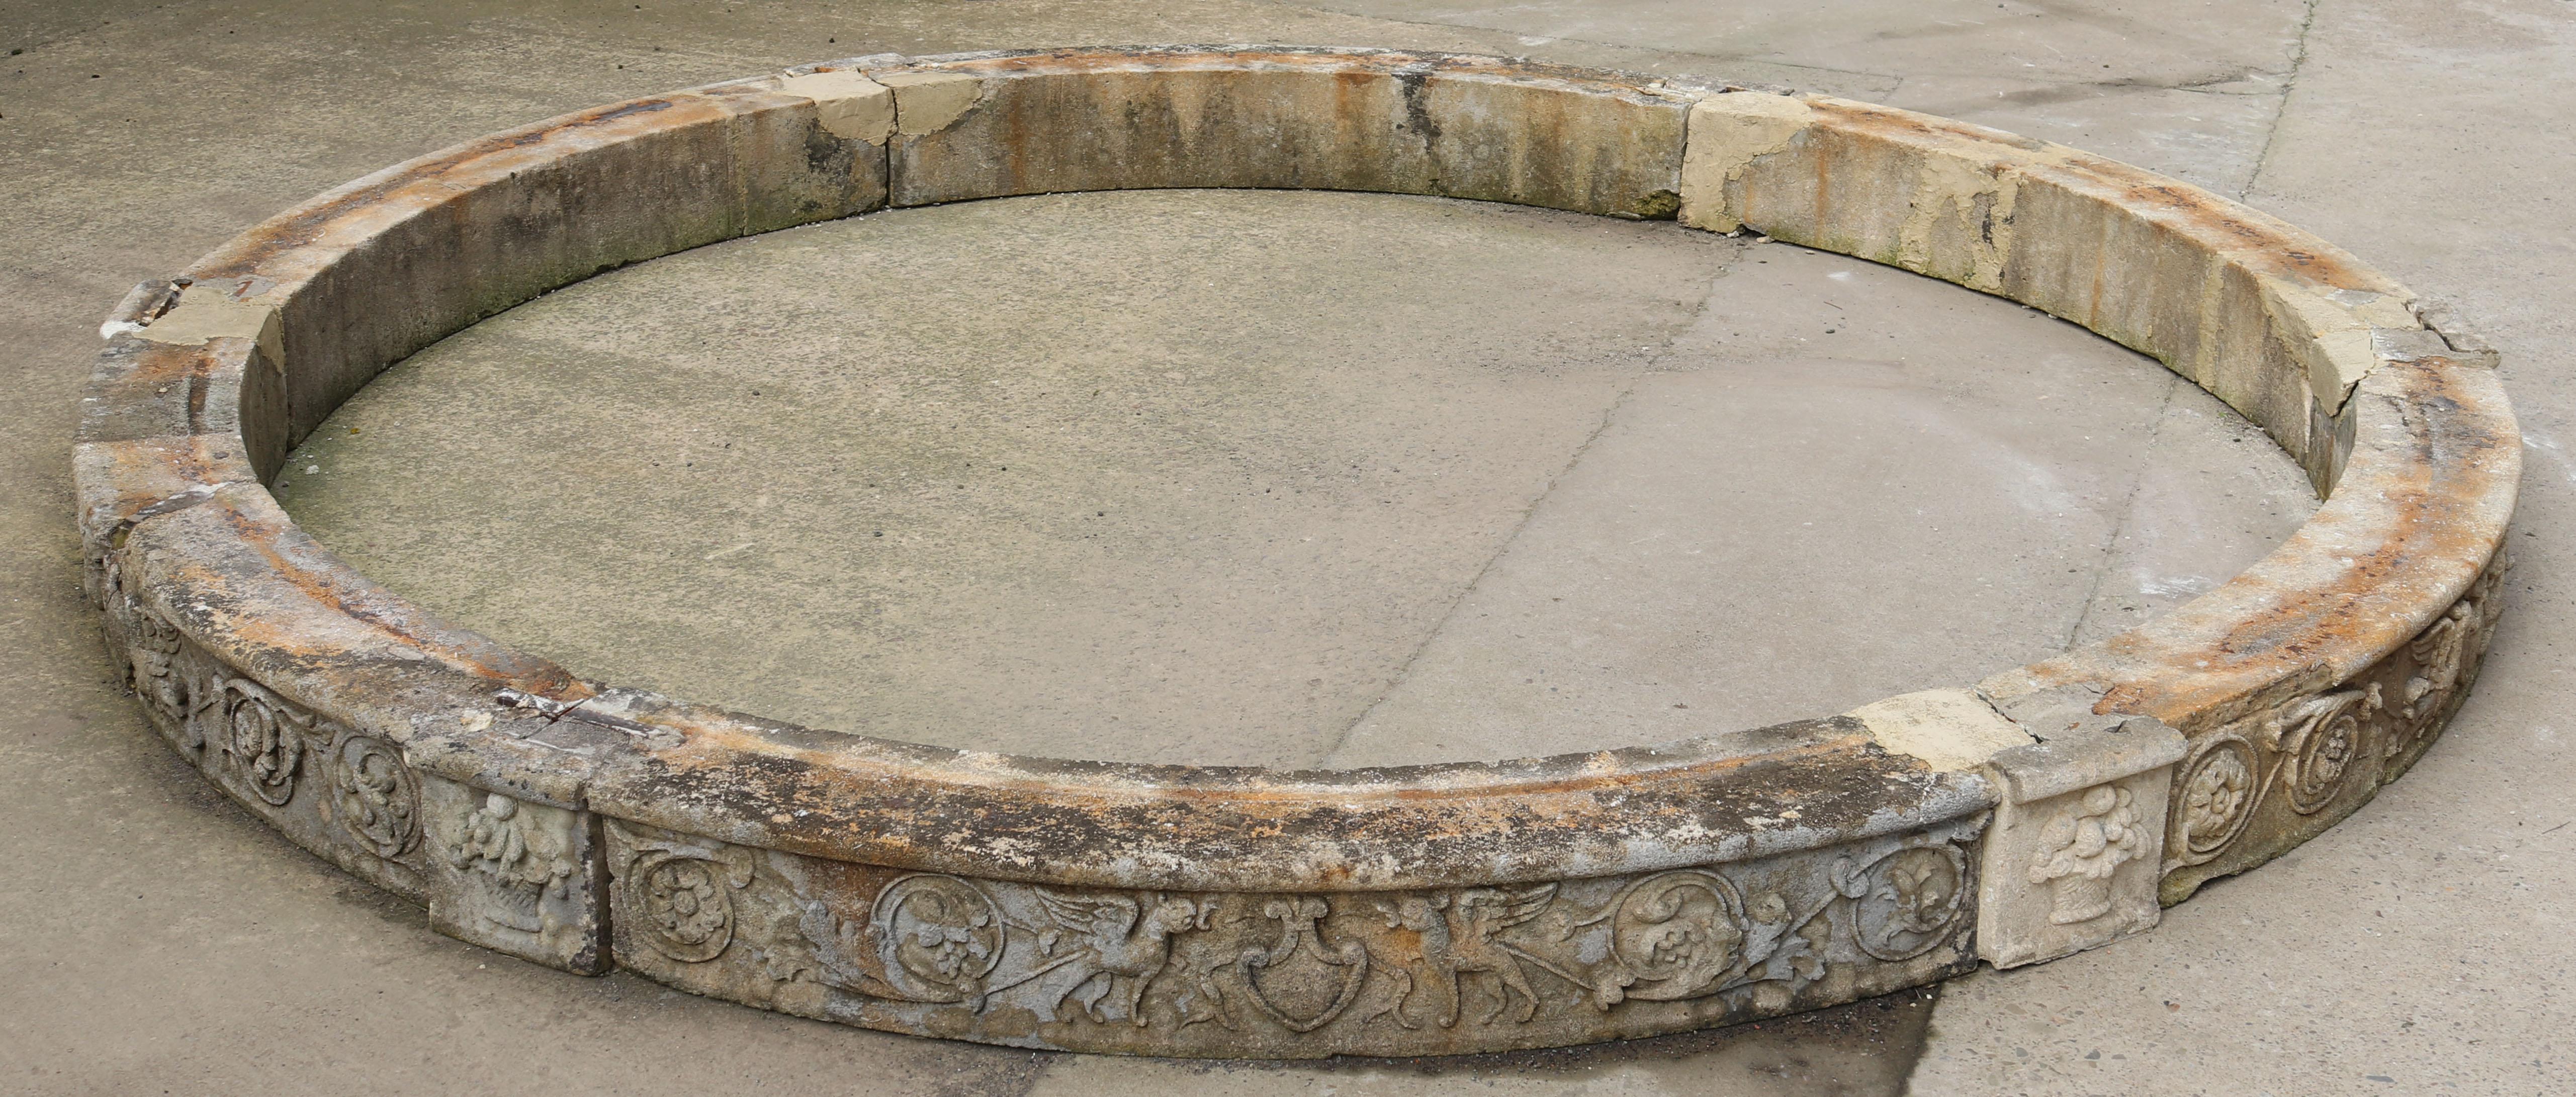 20th Century Reclaimed Carved Limestone Circular Pool Surround